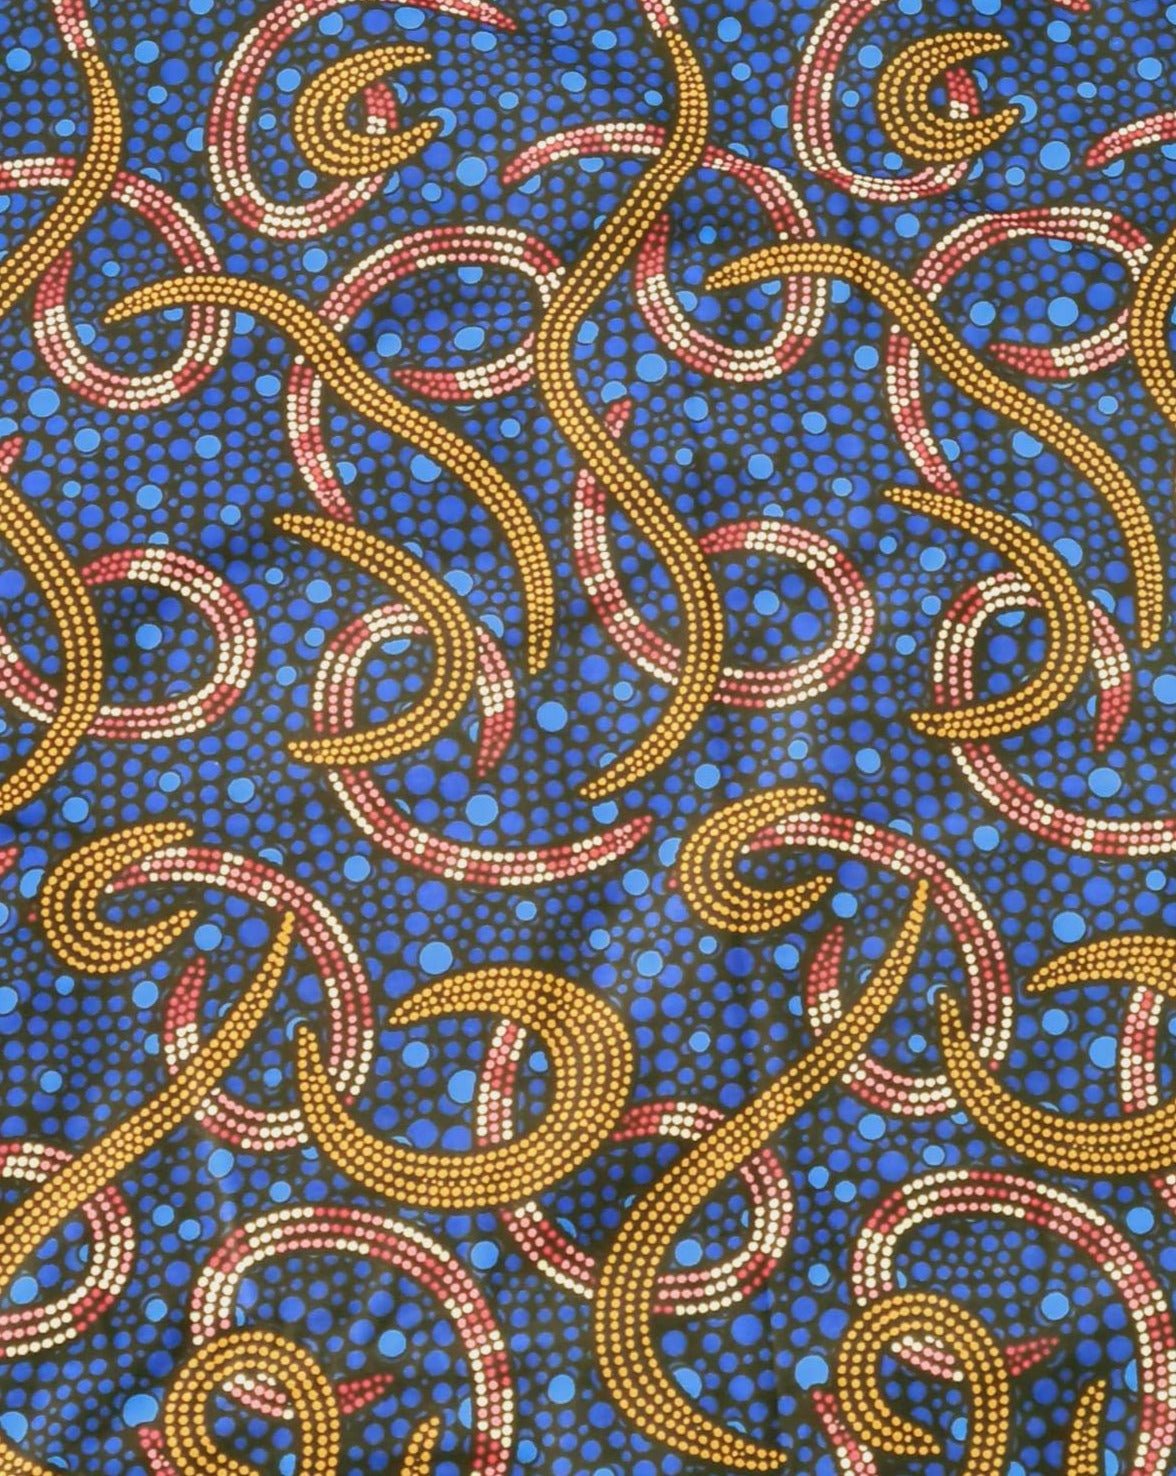 Blue and Brown Swirl Ankara Fabric - akpy40179 - House of Prints